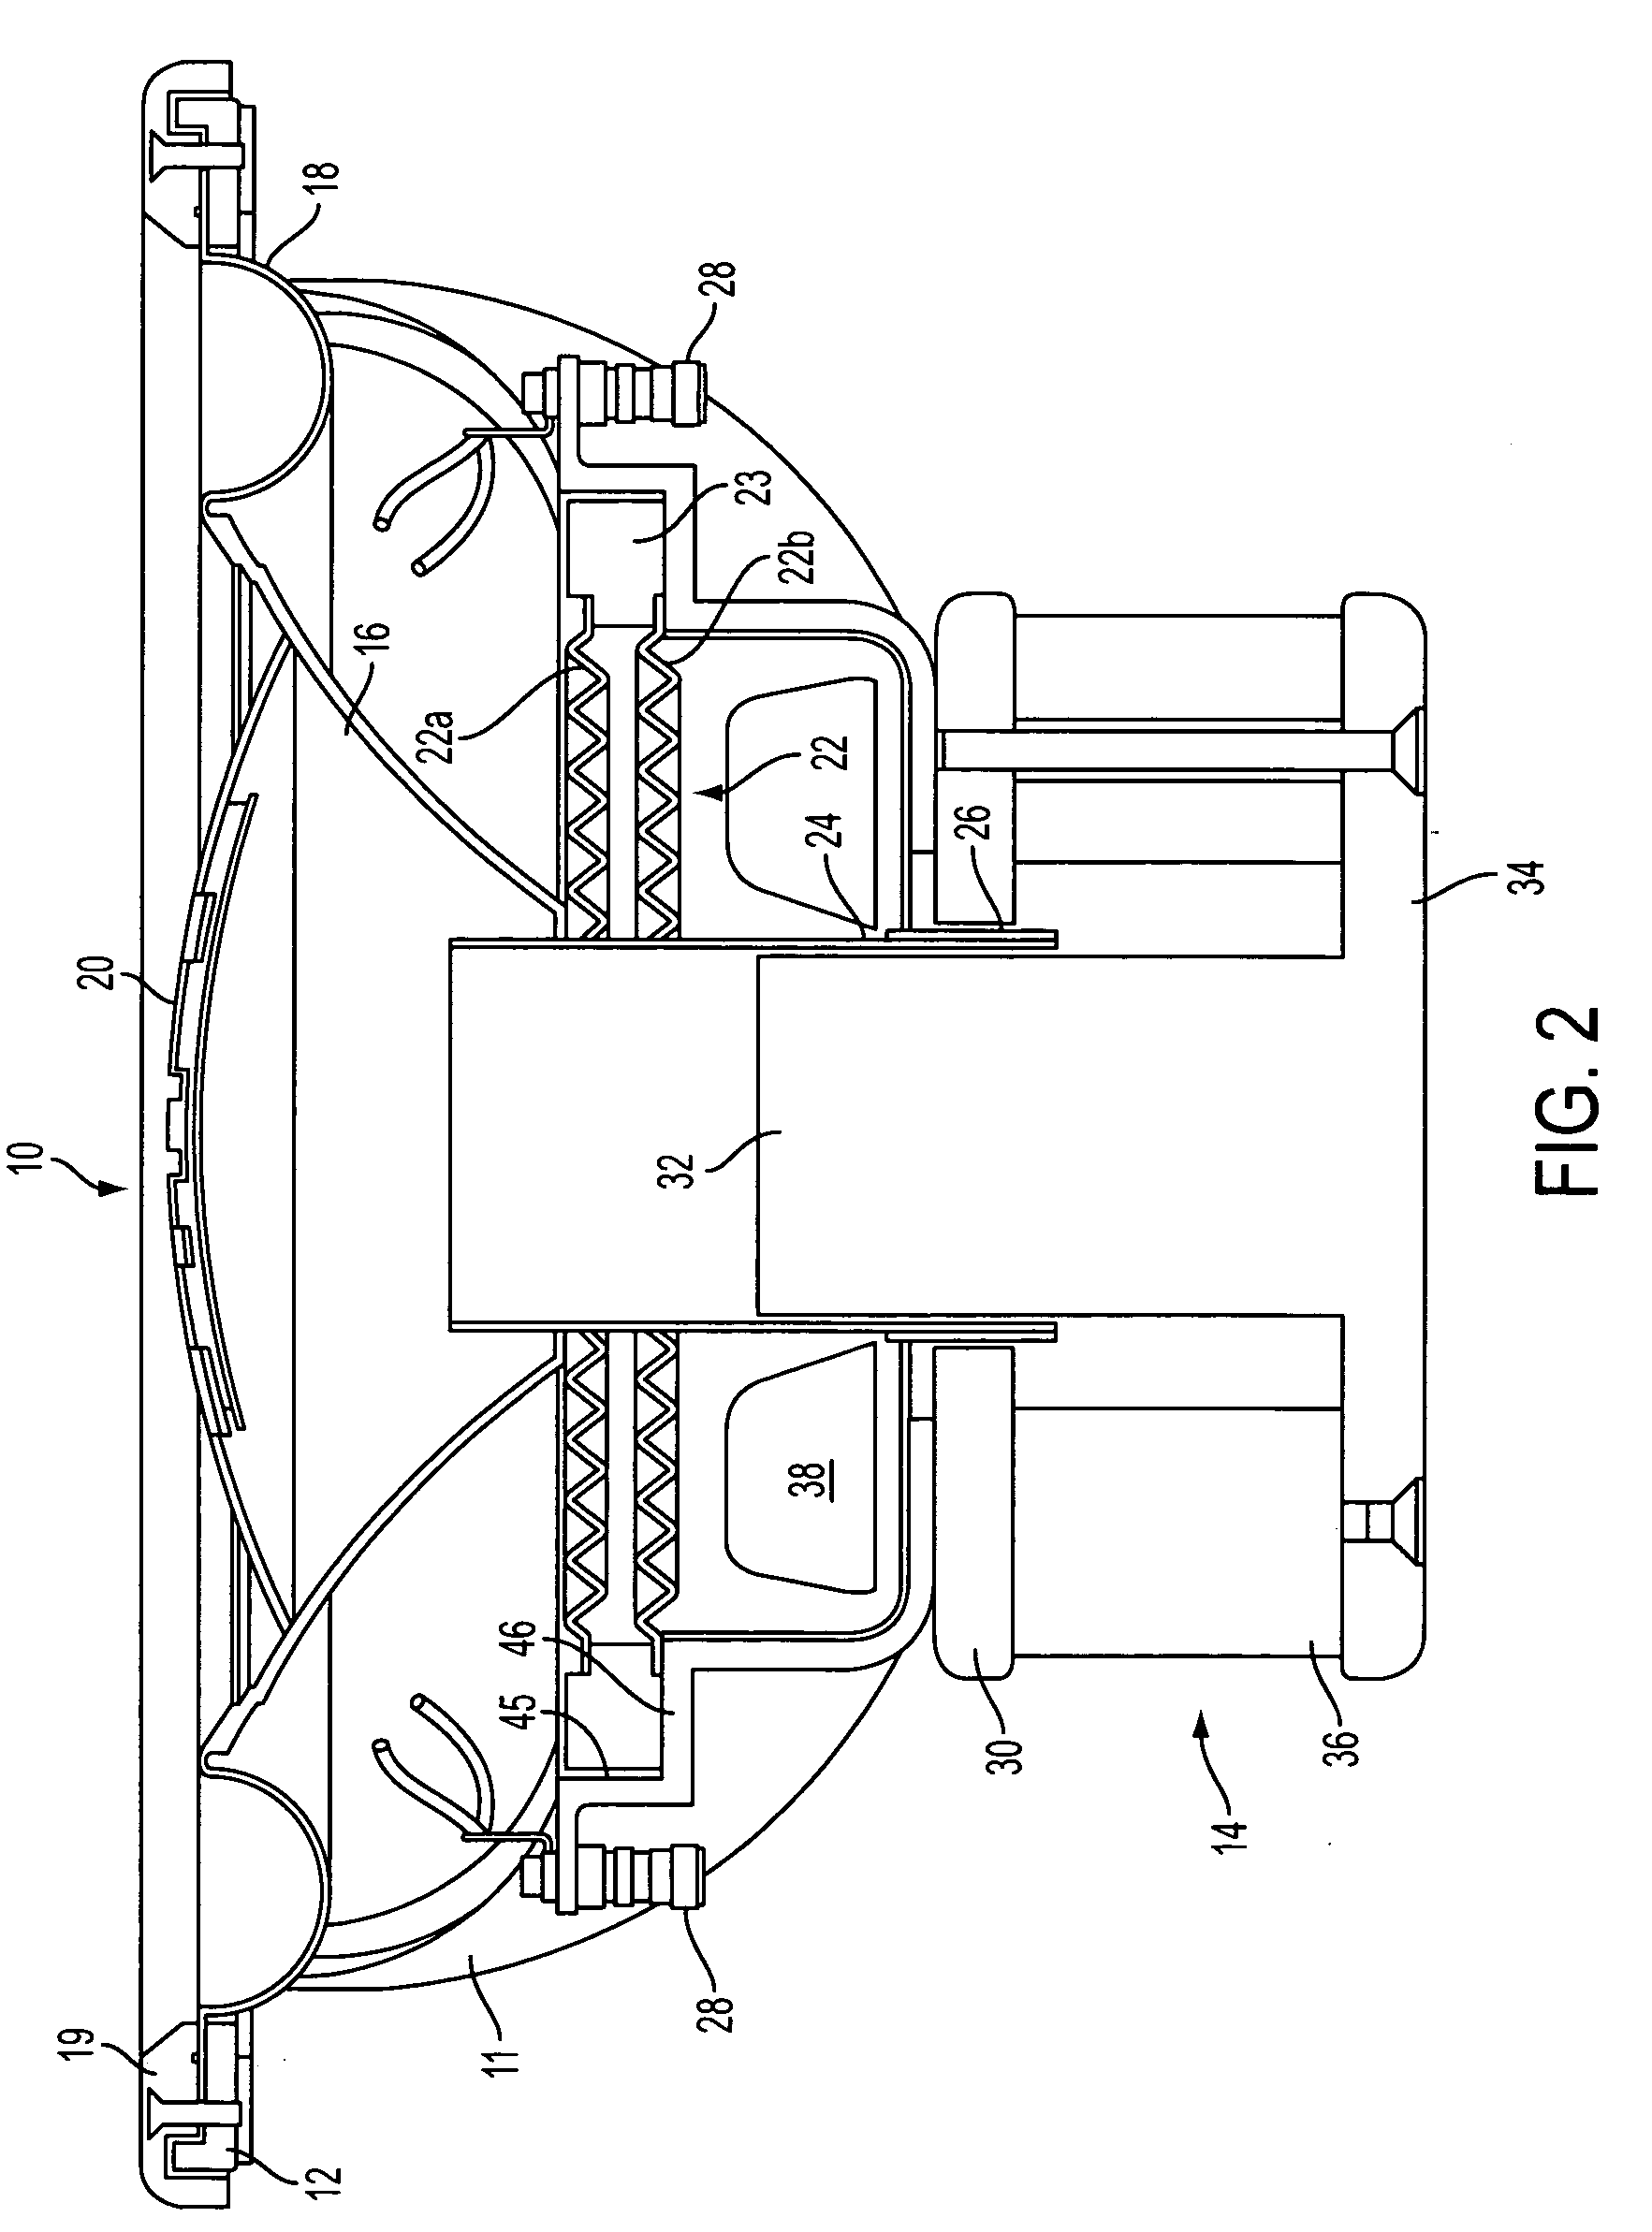 Loudspeaker driver having a removable diaphragm assembly, parts kit and method for rebuilding a loudspeaker driver in the field